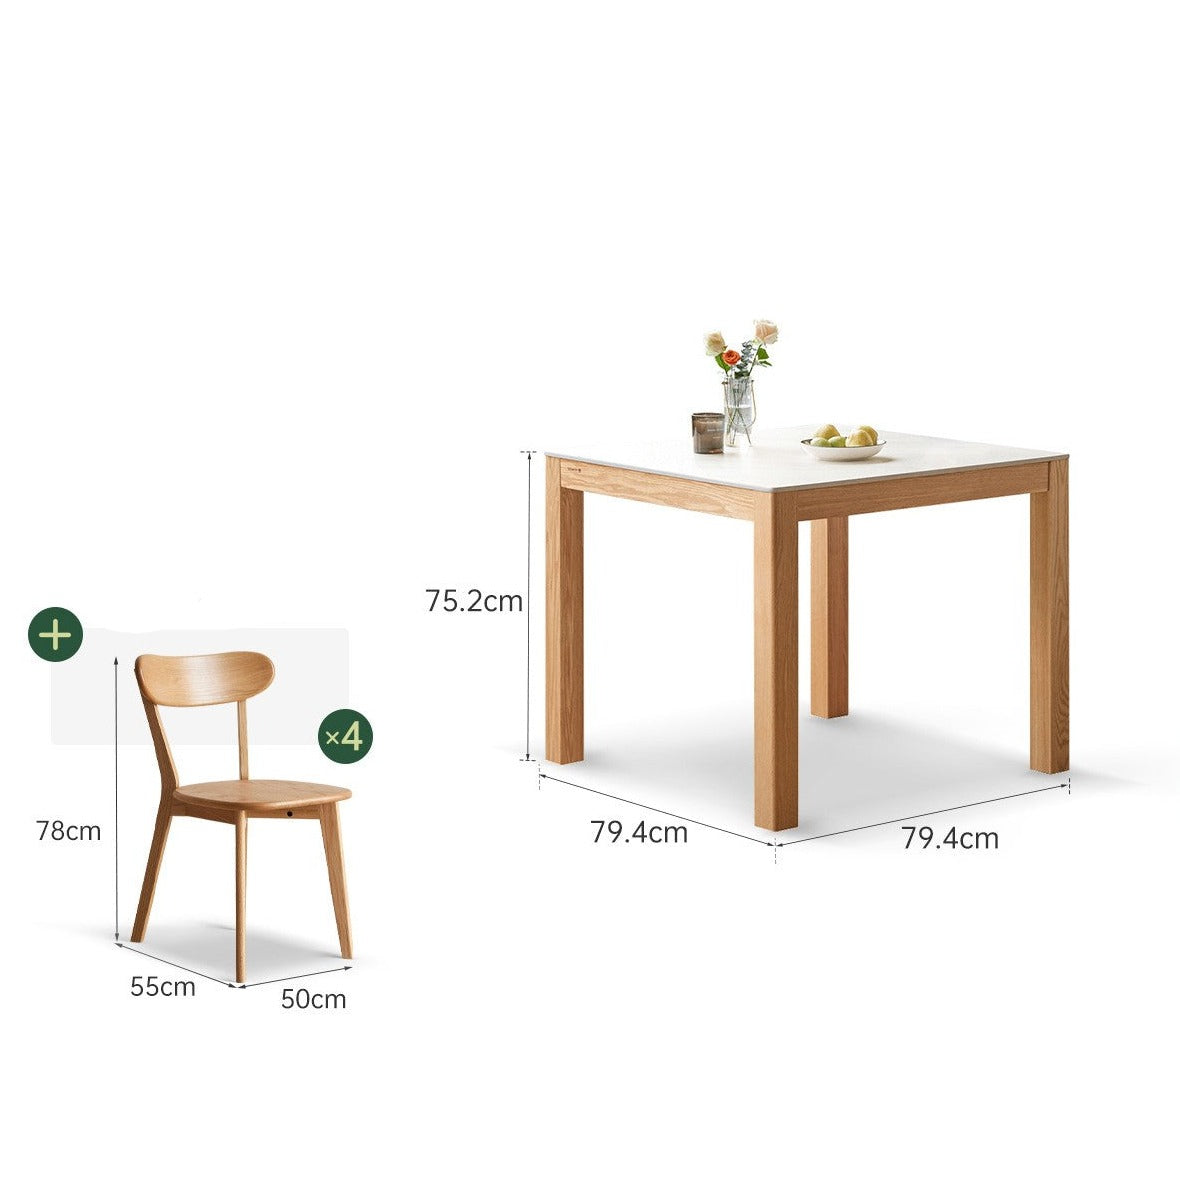 Oak Solid Wood Rock Plate Square Dining Table